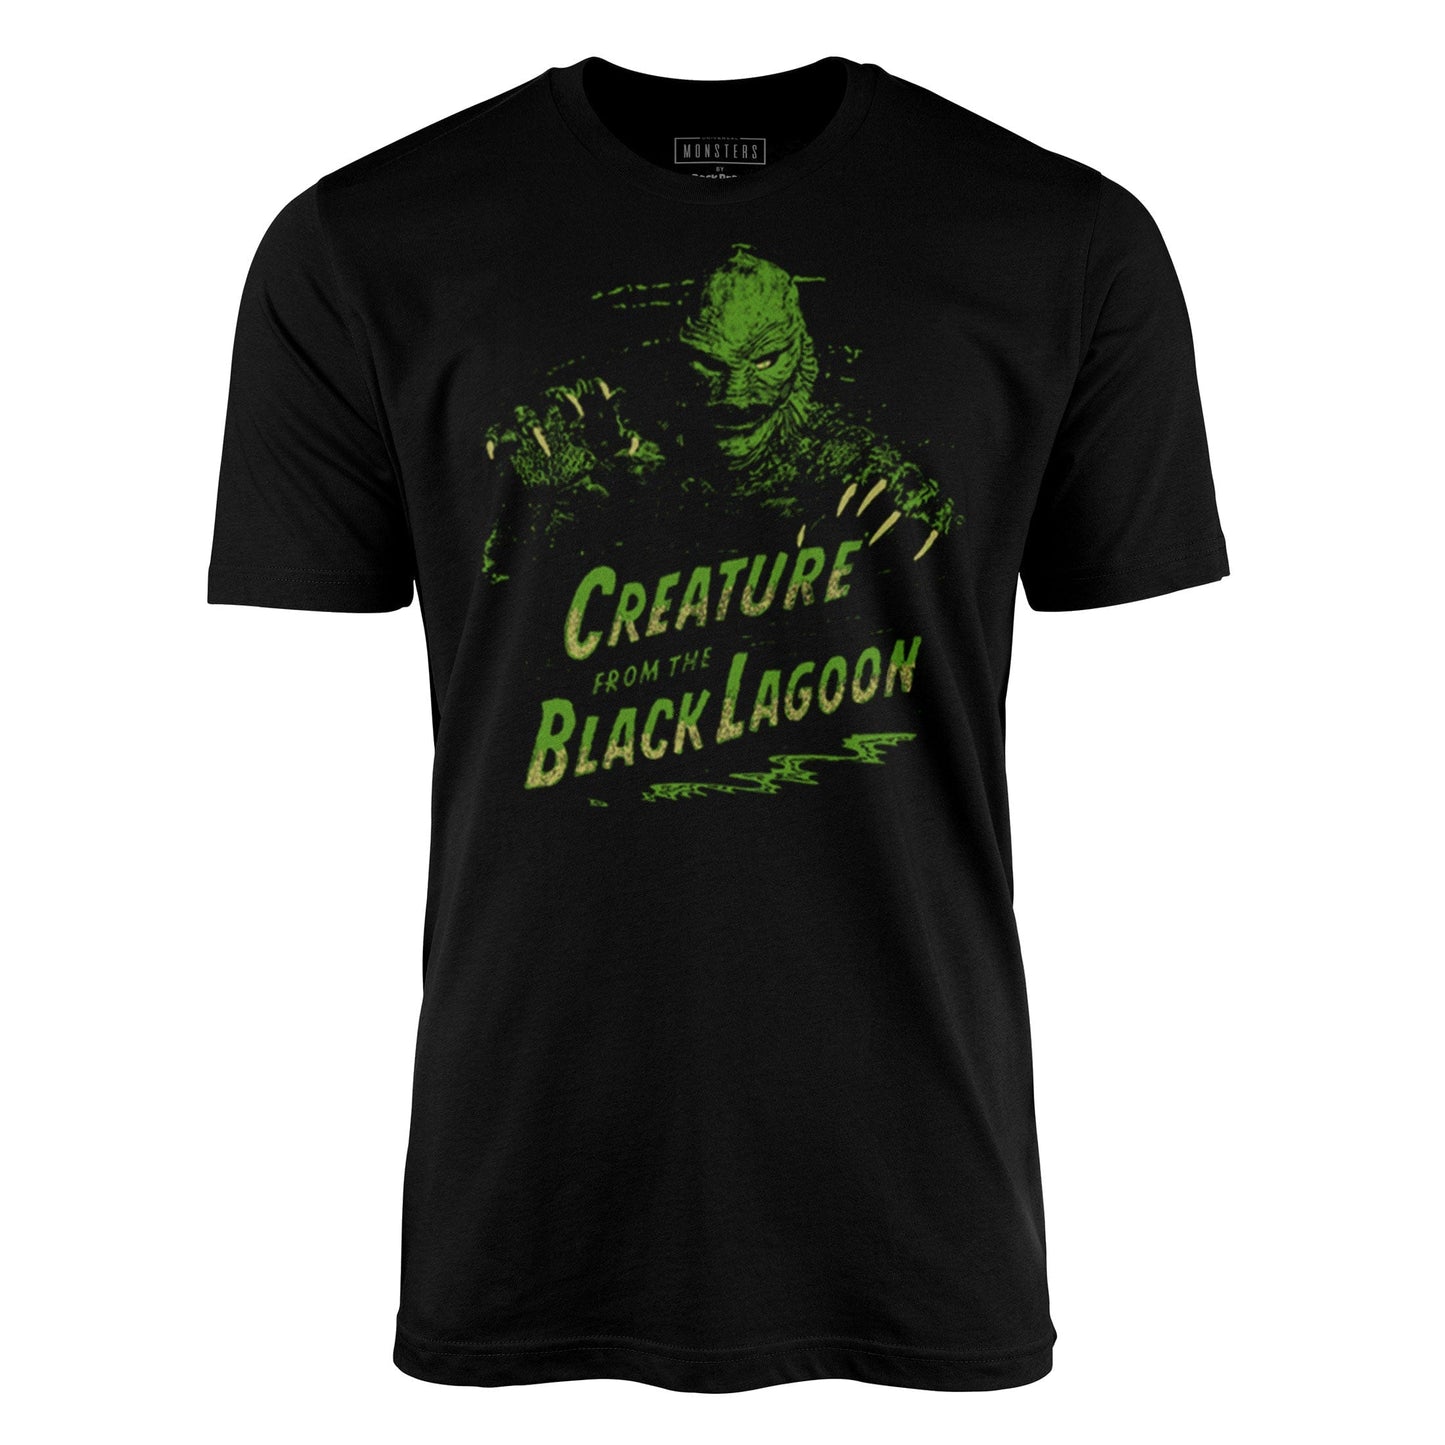 Green Creature From the Black Lagoon Tee